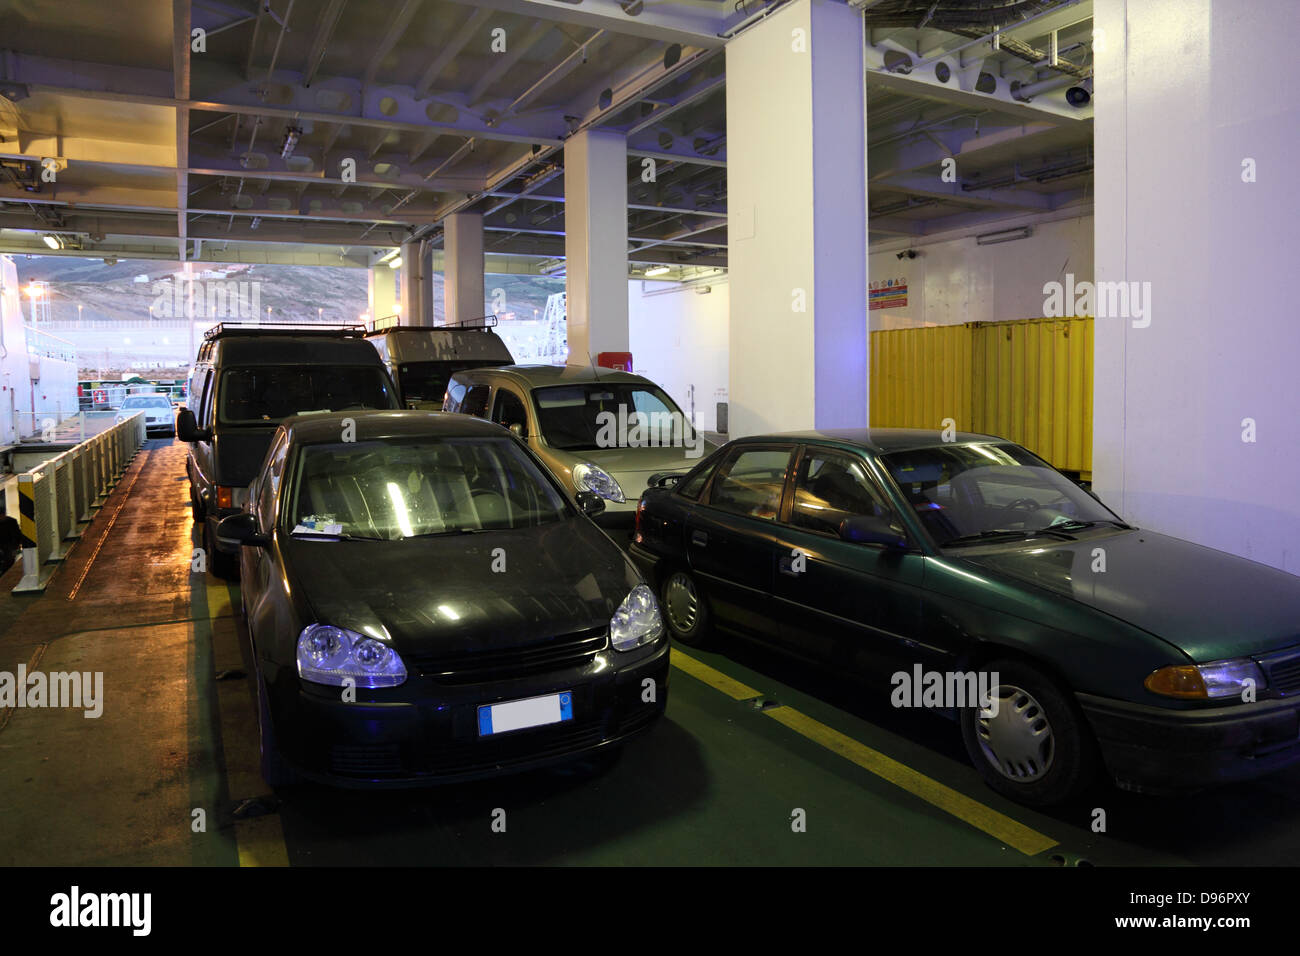 Autos in the car deck of a ferry ship in Tangier Med, Morocco Stock Photo